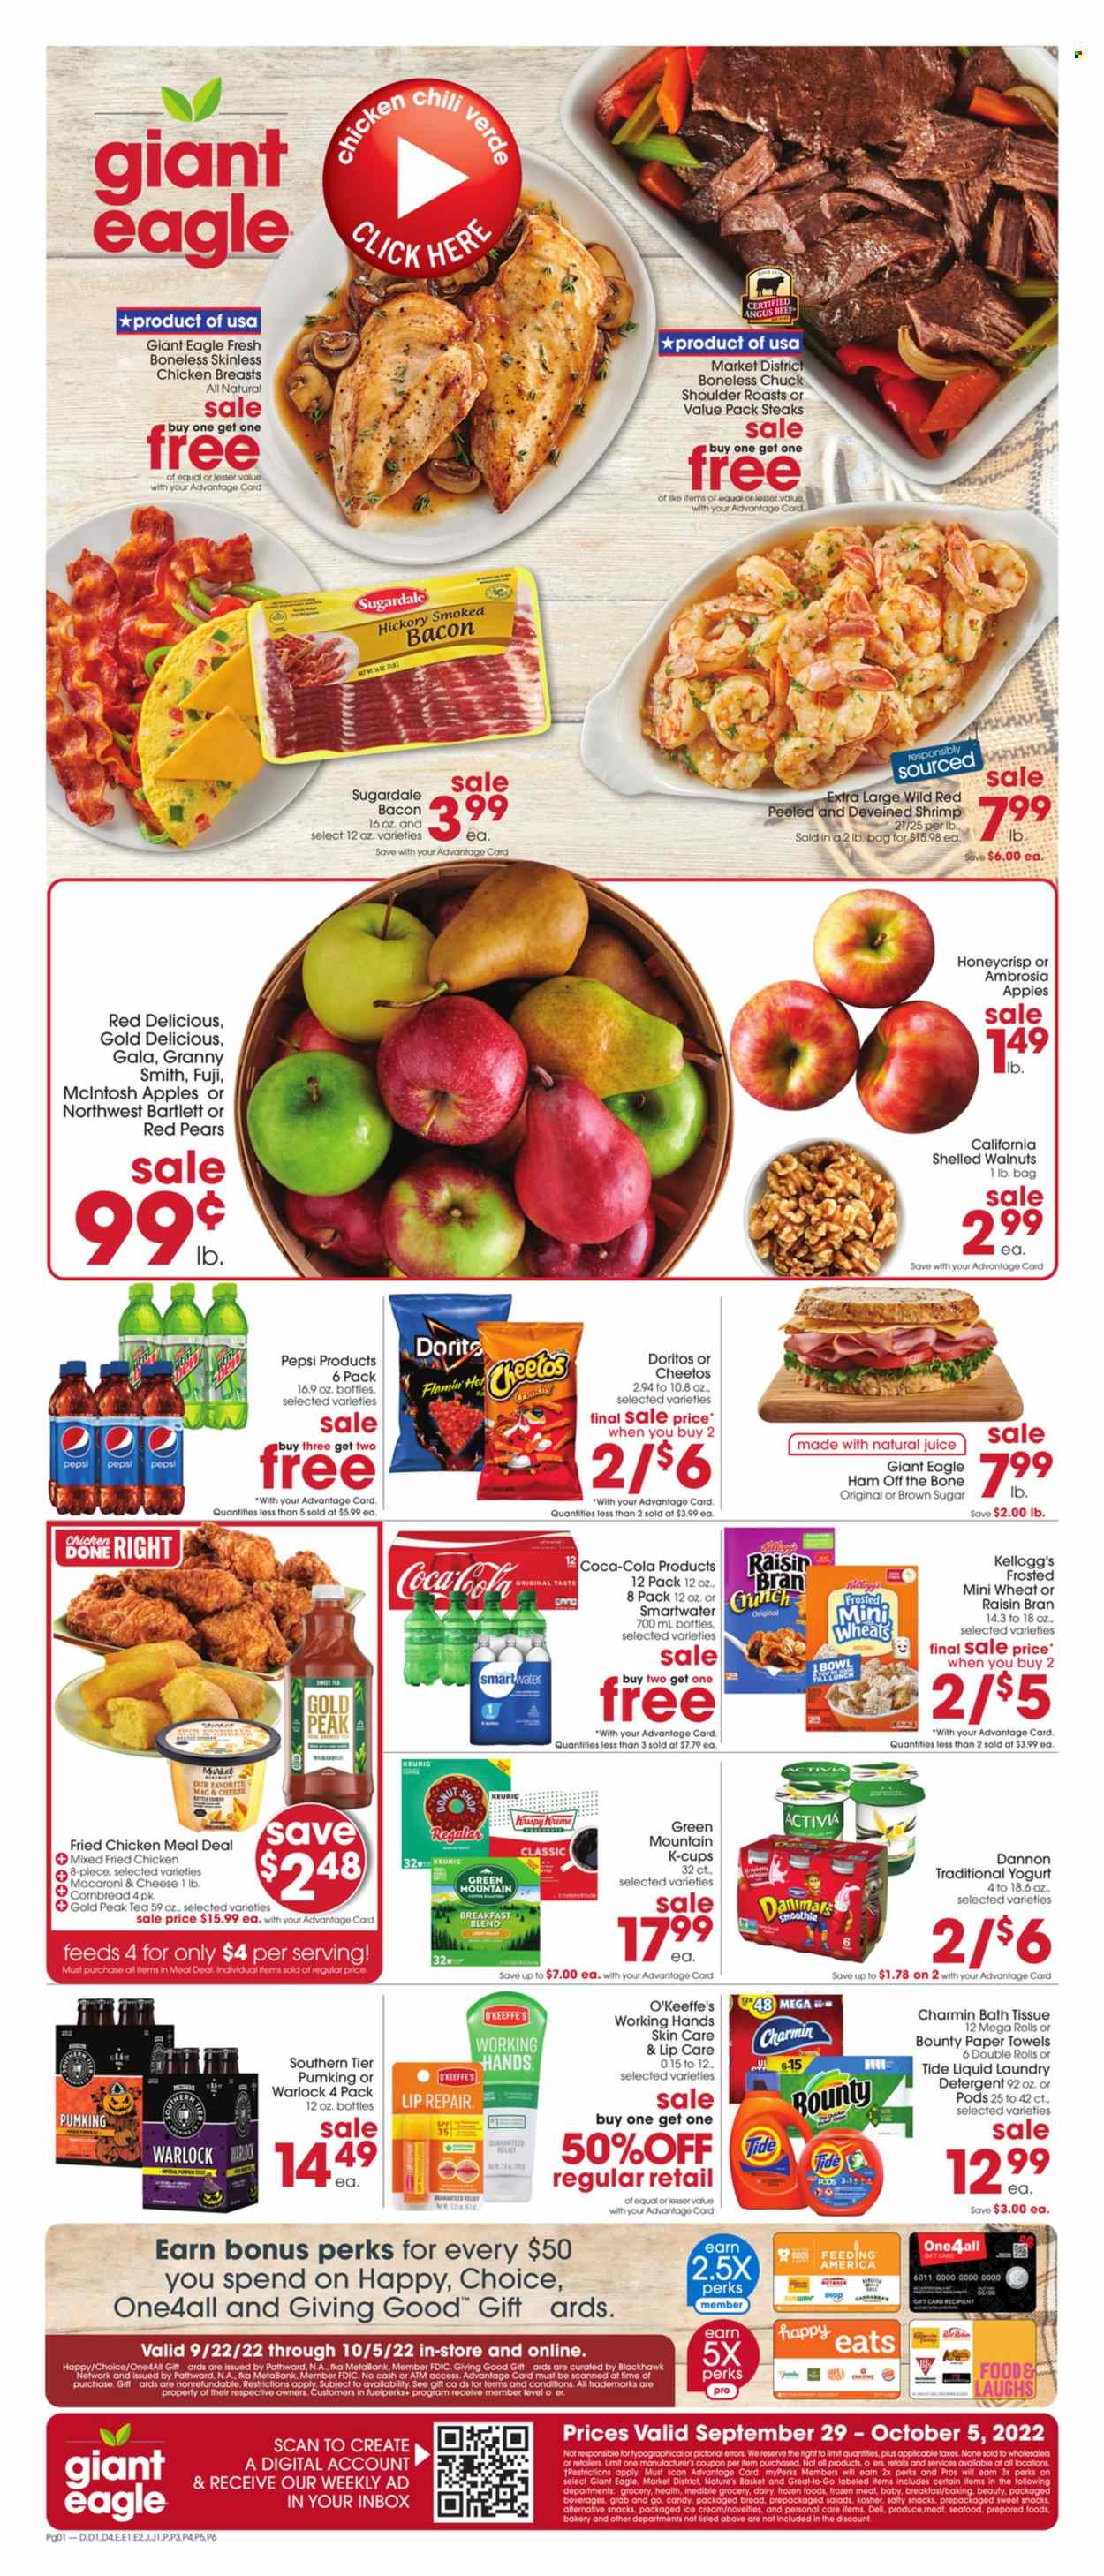 thumbnail - Giant Eagle Flyer - 09/29/2022 - 10/05/2022 - Sales products - corn bread, apples, Gala, Red Delicious apples, pears, Granny Smith, seafood, shrimps, fried chicken, Sugardale, bacon, ham, ham off the bone, yoghurt, Activia, Dannon, ice cream, snack, Bounty, Kellogg's, Doritos, Cheetos, Raisin Bran, walnuts, Coca-Cola, Pepsi, juice, Gold Peak Tea, smoothie, Smartwater, tea, coffee, coffee capsules, K-Cups, Keurig, breakfast blend, Green Mountain, chicken breasts, beef meat, steak, bath tissue, kitchen towels, paper towels, Charmin, detergent, Tide, laundry detergent. Page 1.